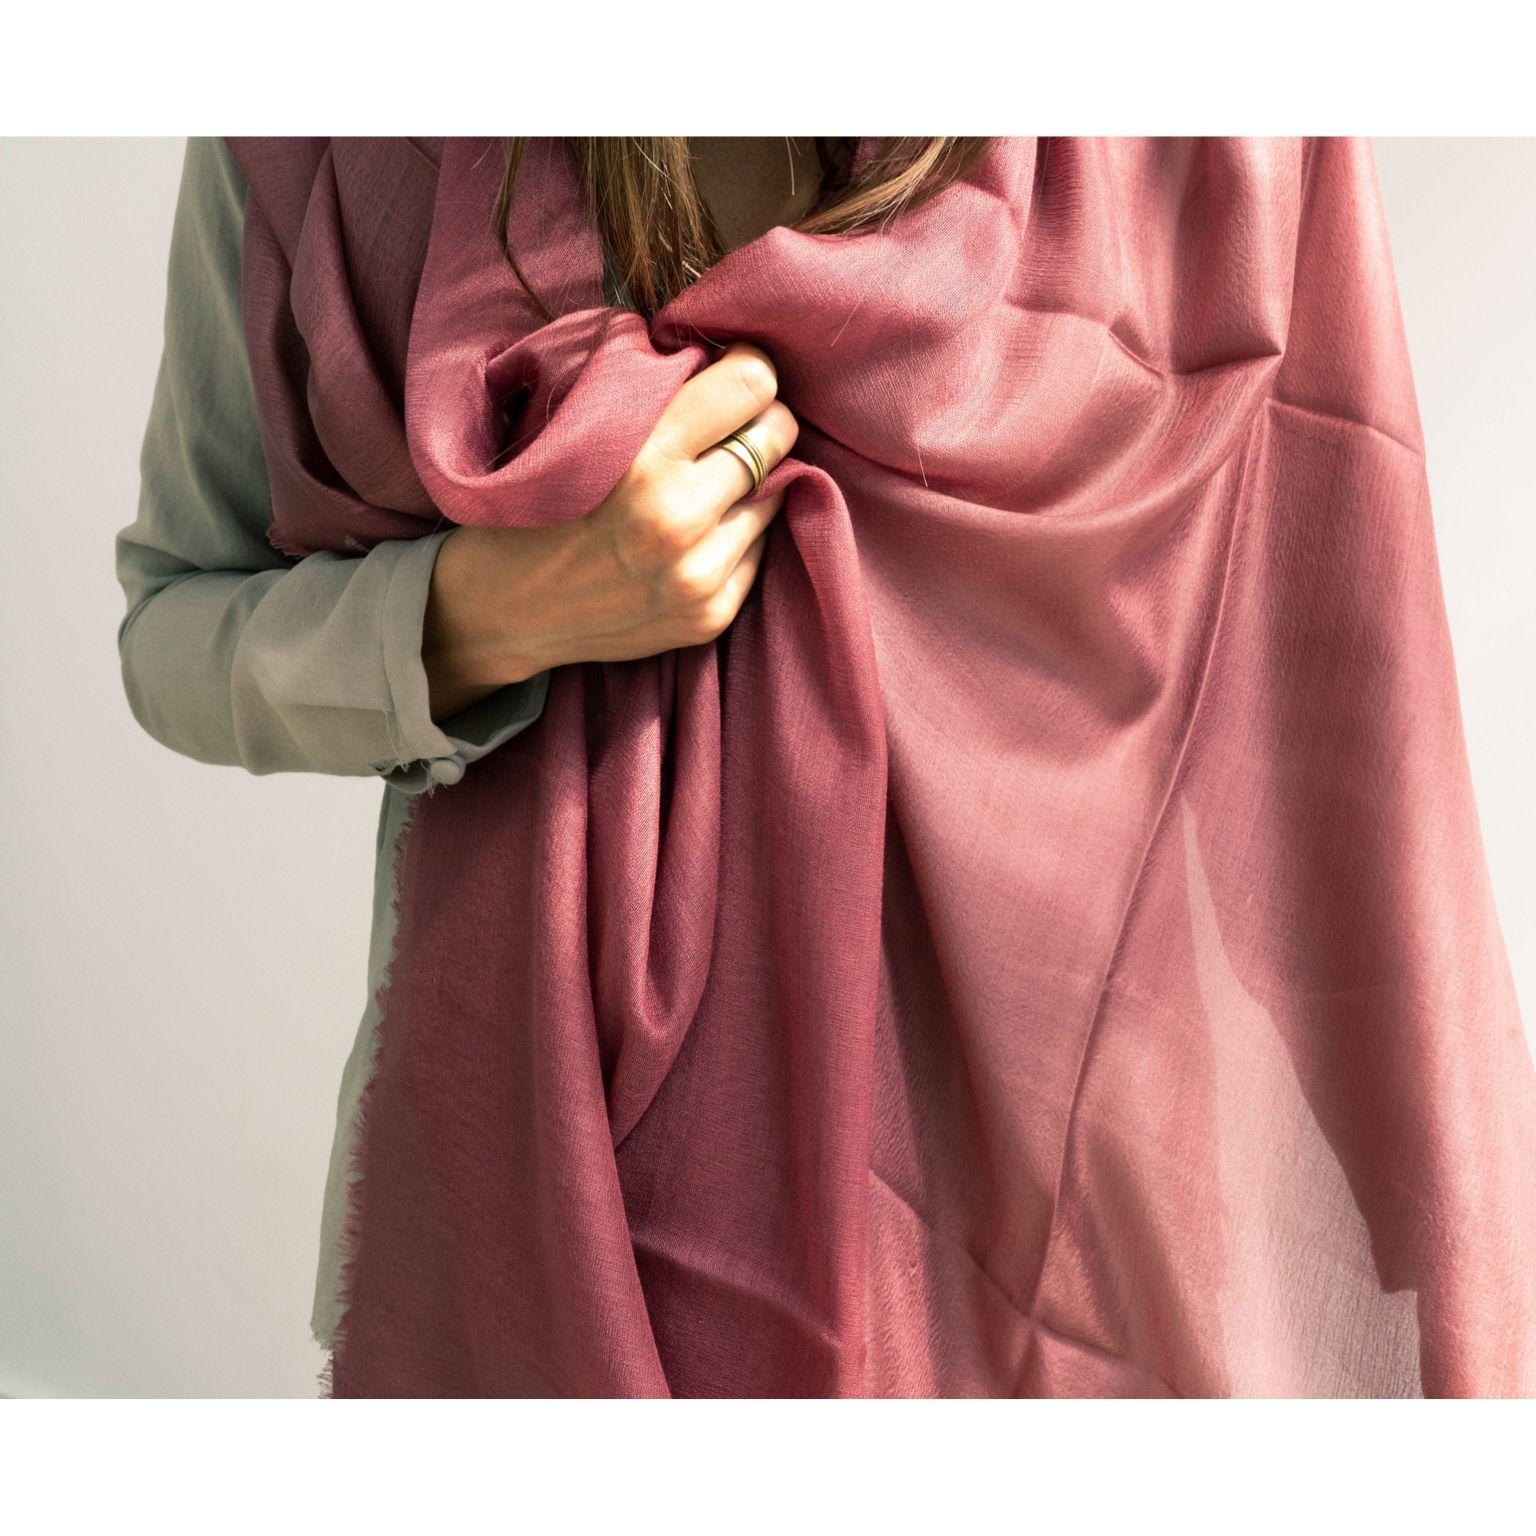 Custom design by Studio Variously, Rose scarf / wrap / shawl is a finely handwoven piece by master artisans in Nepal.

A sustainable design brand based out of Michigan, Studio Variously exclusively collaborates with artisan communities to restore